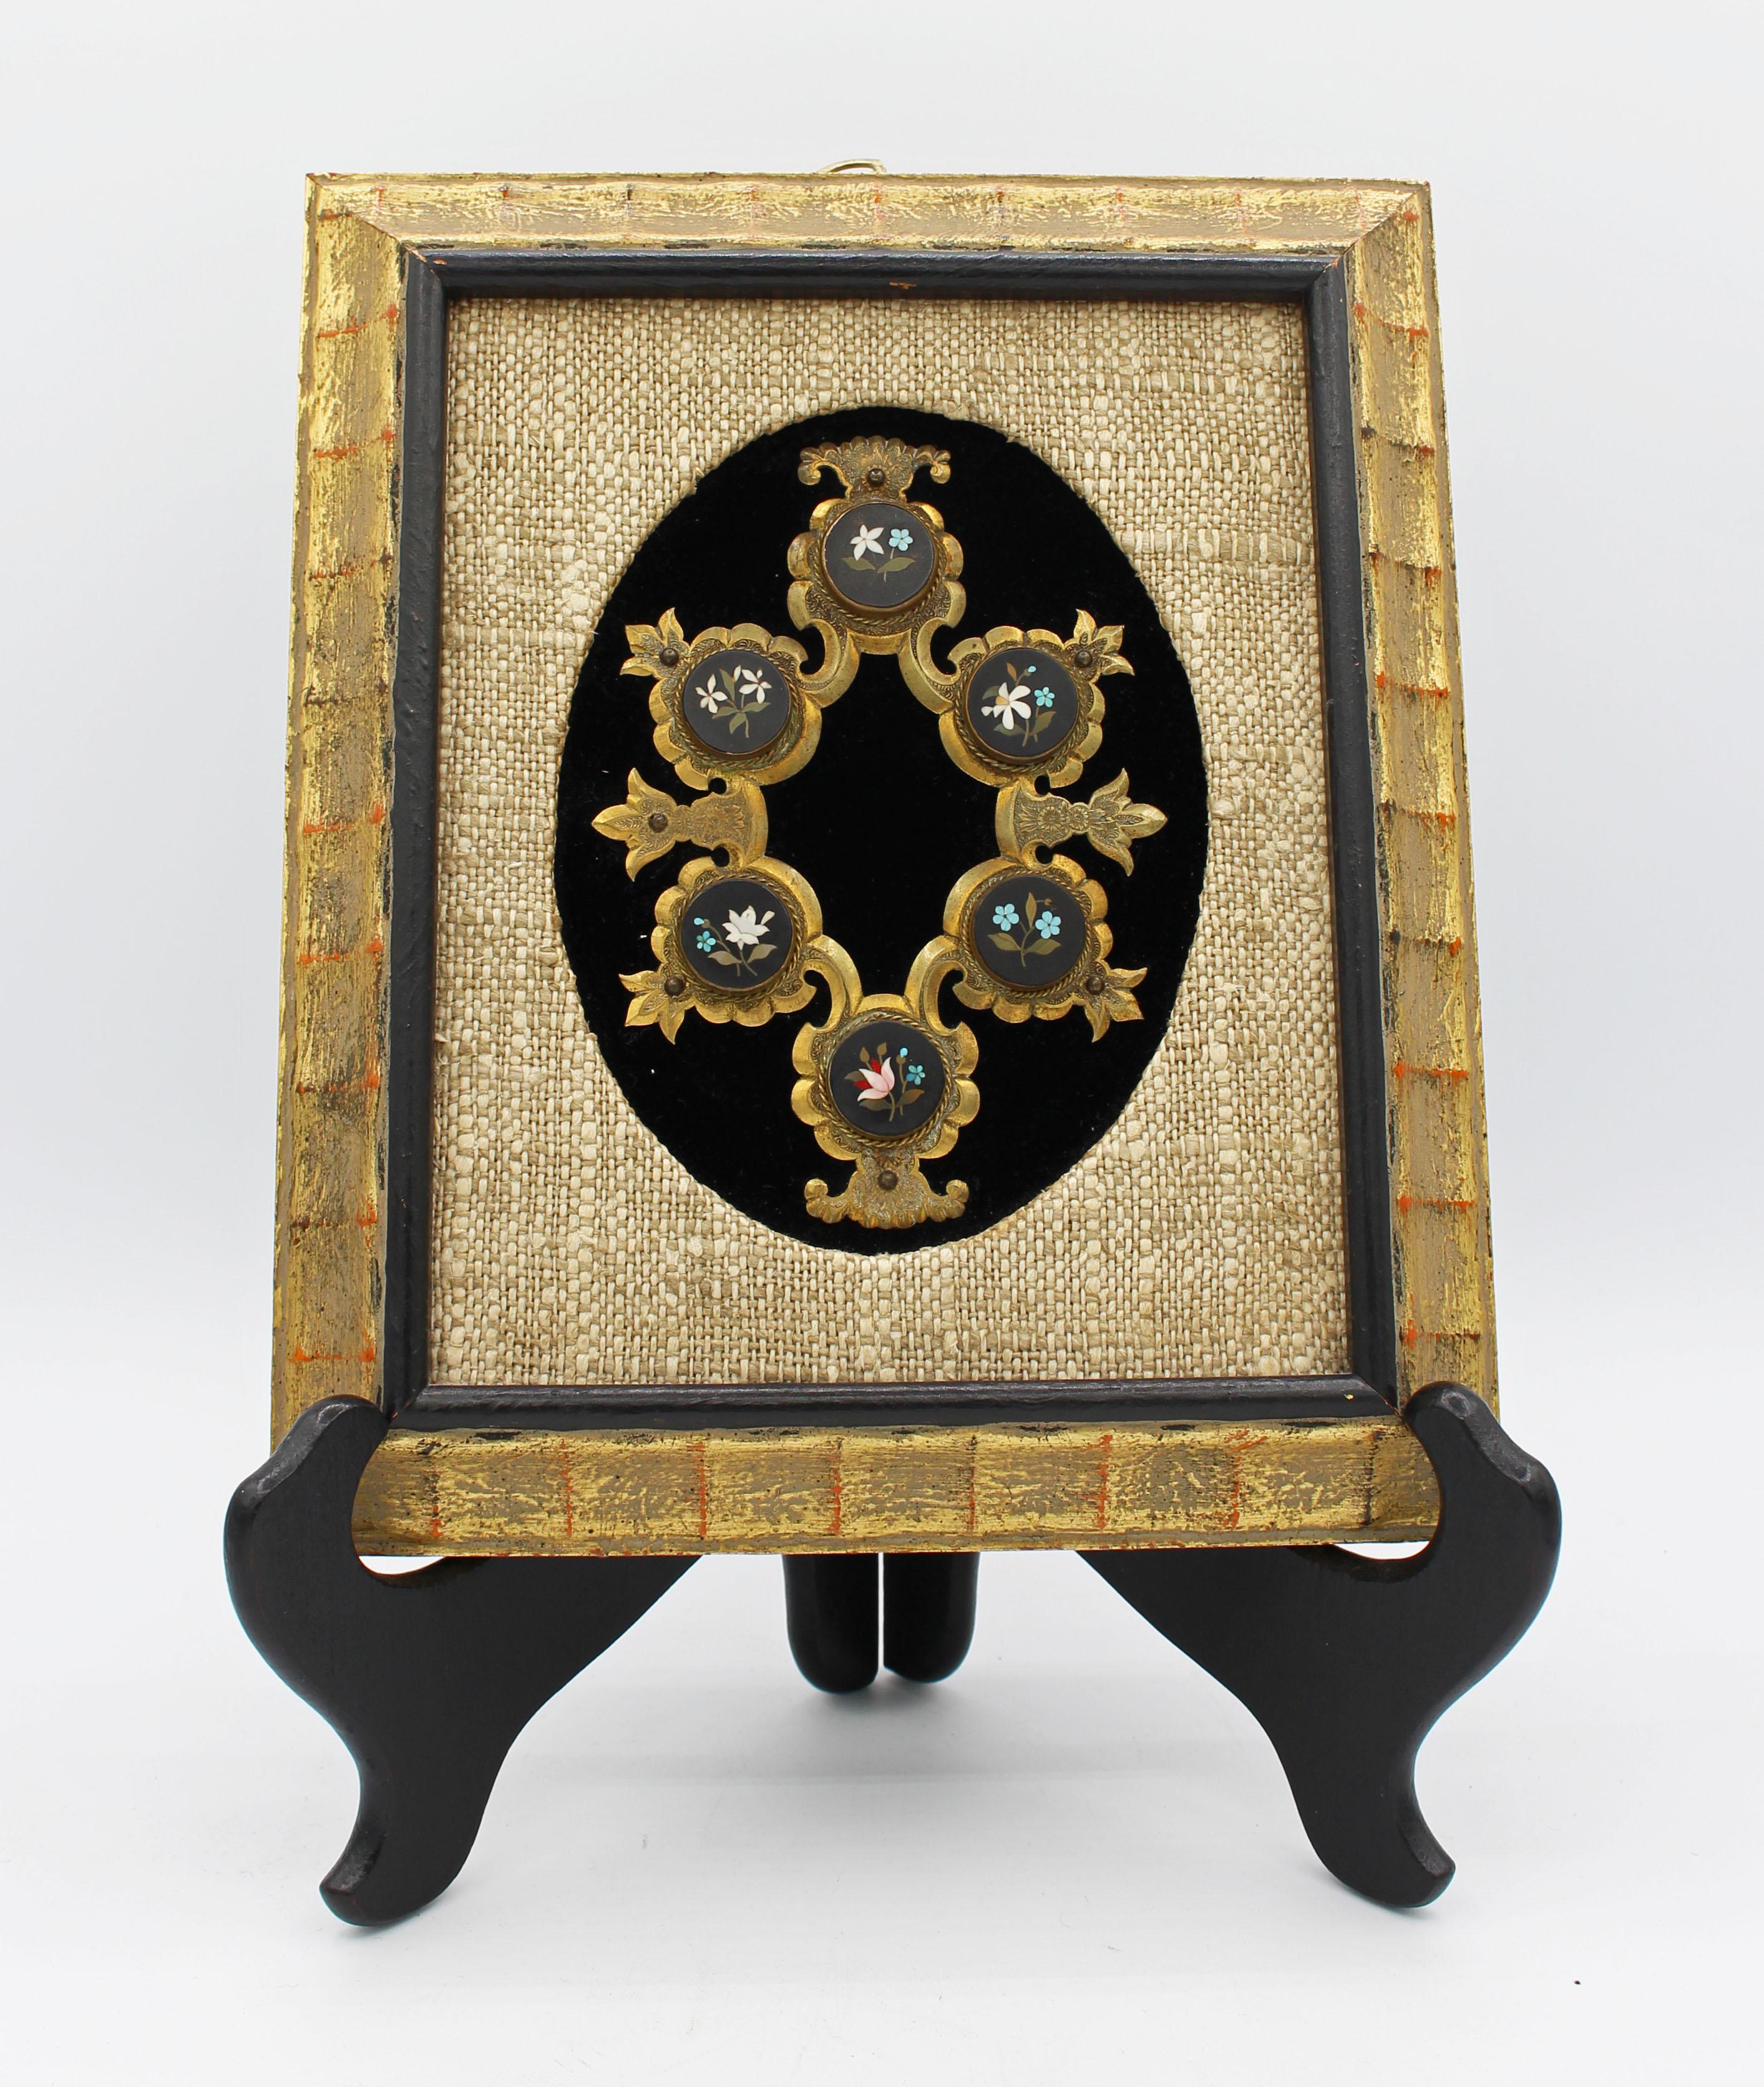 Italian, c.1880, engraved gilt brass cartouche set with six floral pietra dura circular medallions, now on black velvet ground with linen matt in rubbed gilt frame. Exquisit workmanshipship. One minute petal lacking in medallion at four o'clock.